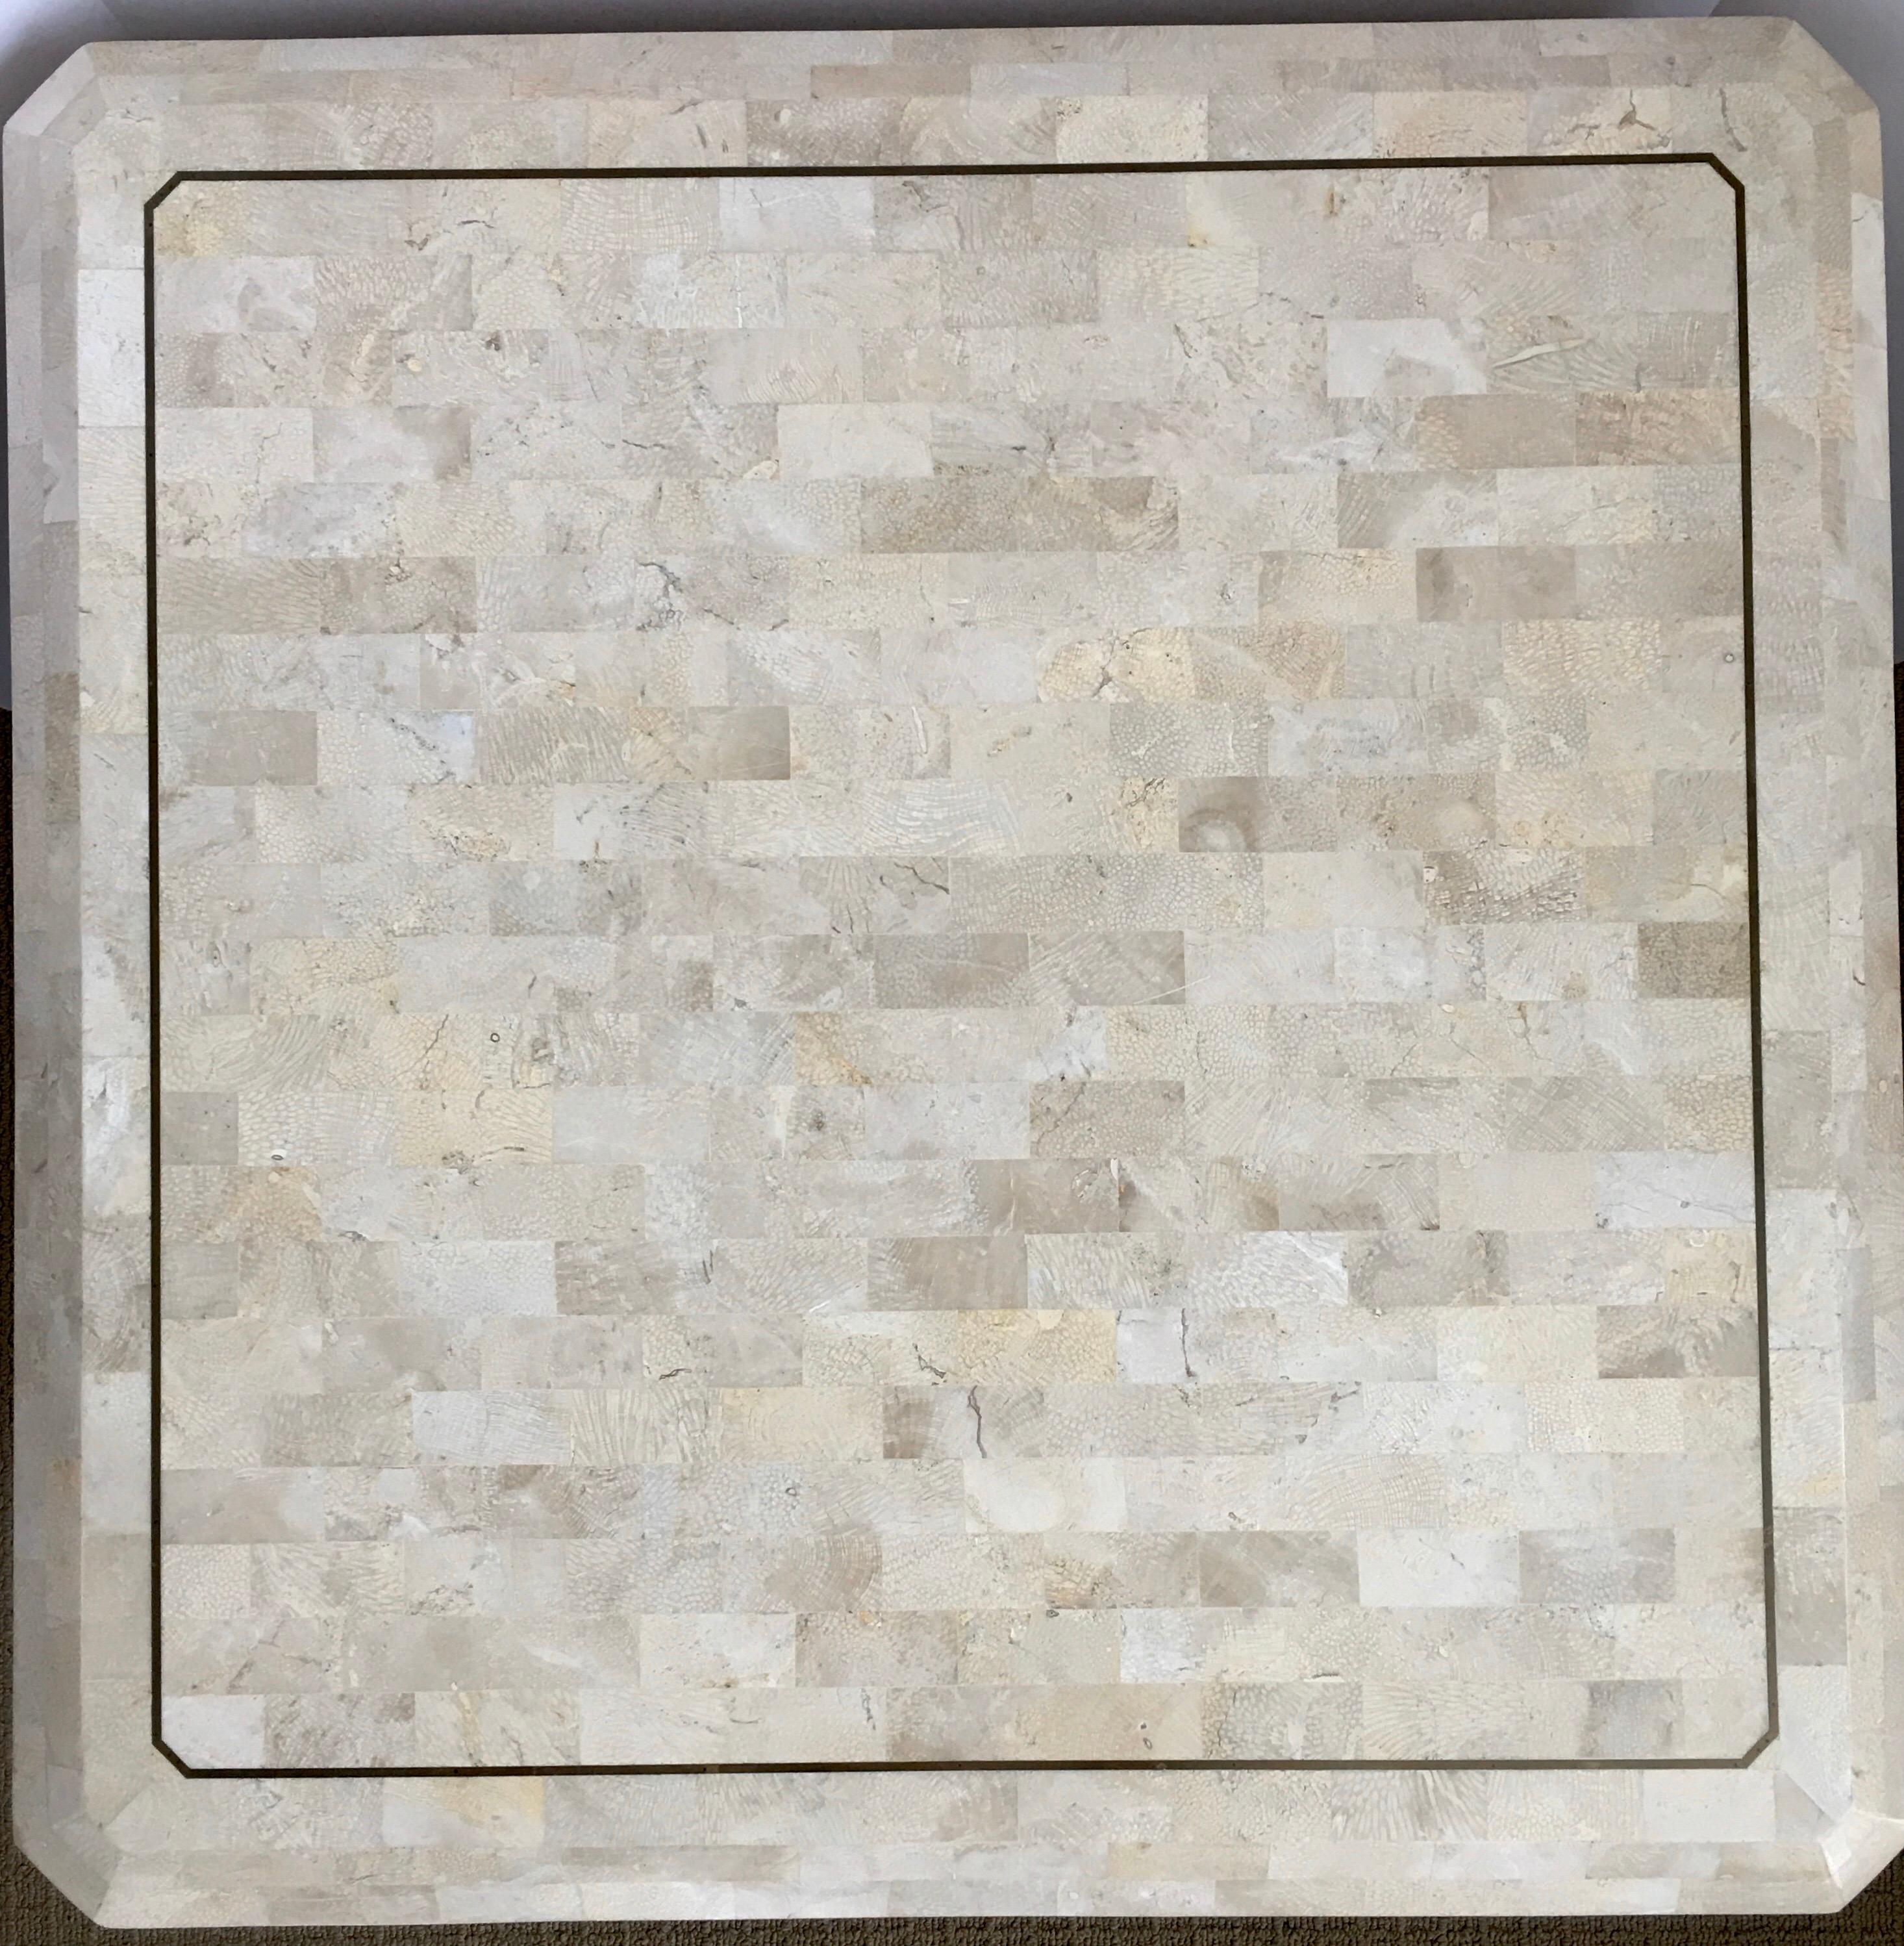 Beautiful Hollywood Regency style tessellated fossil stone marble end table in the style of Karl Springer and Maitland Smith. This occasional wood table features hand-laid neutral cream colored fossil stones with brass inlay trim on top. Overall